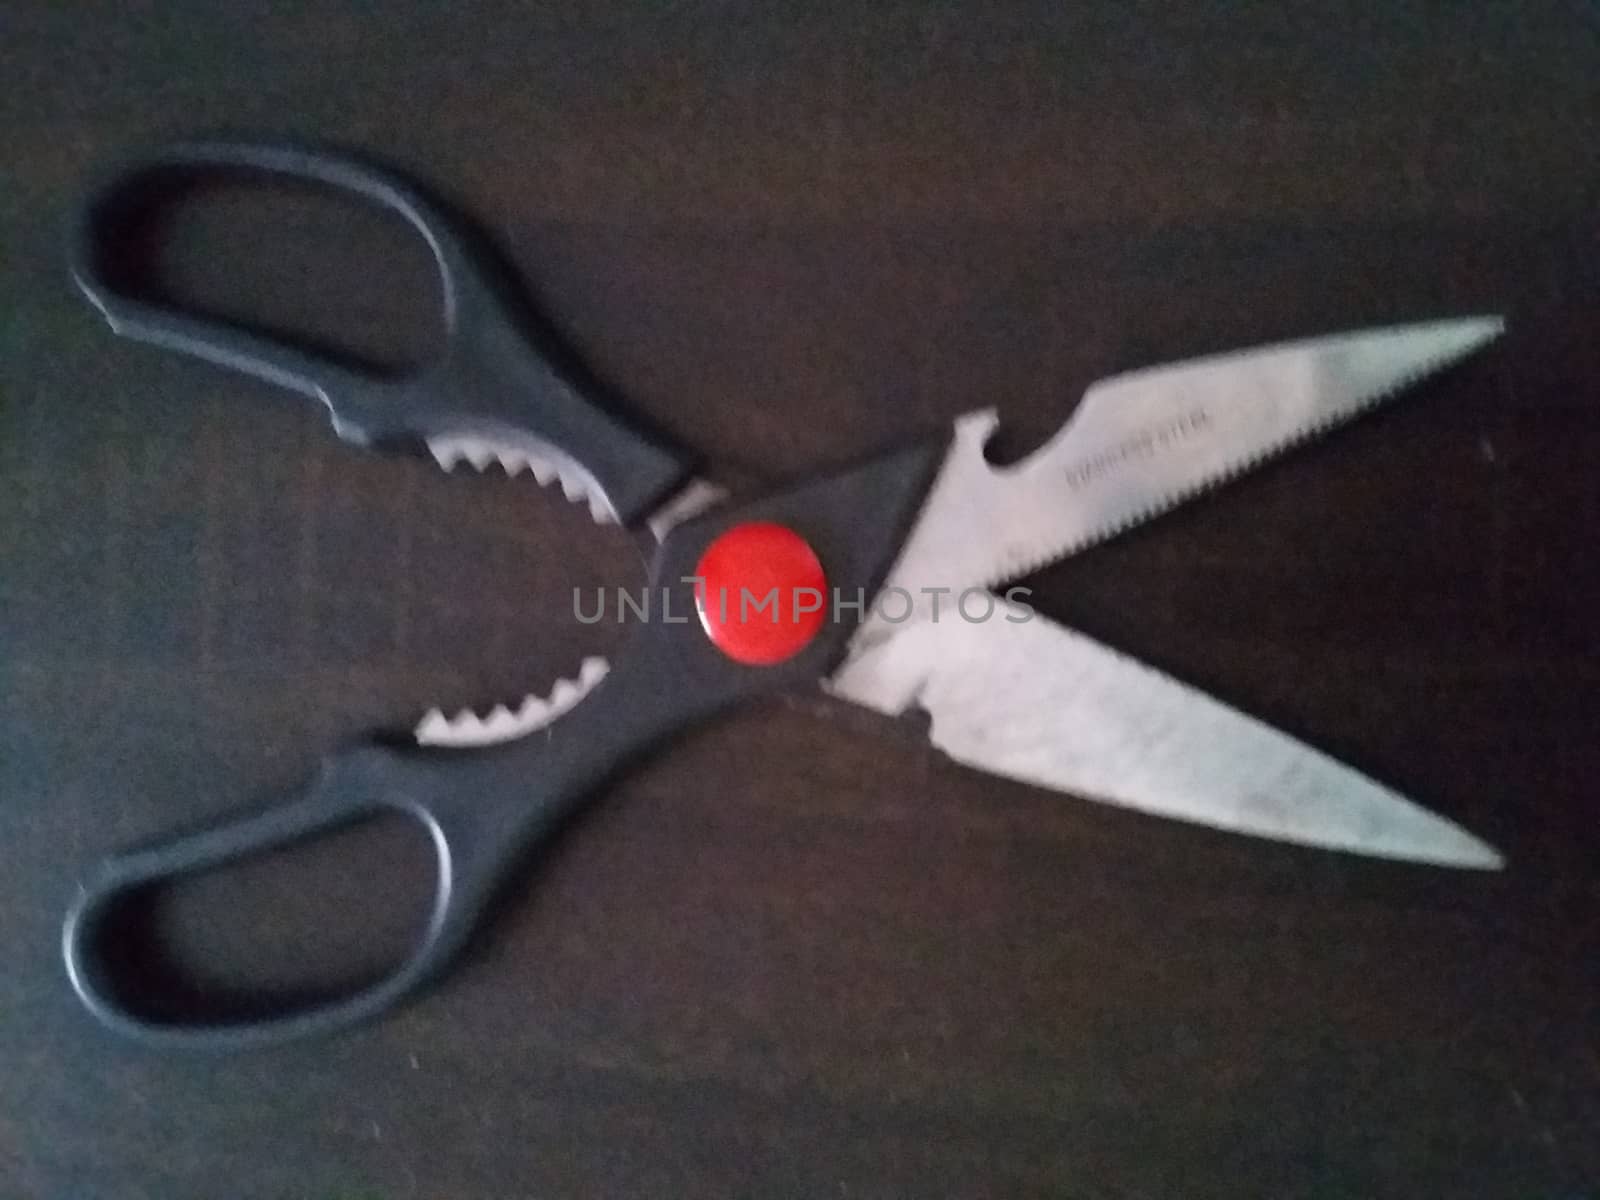 a black and red scissors